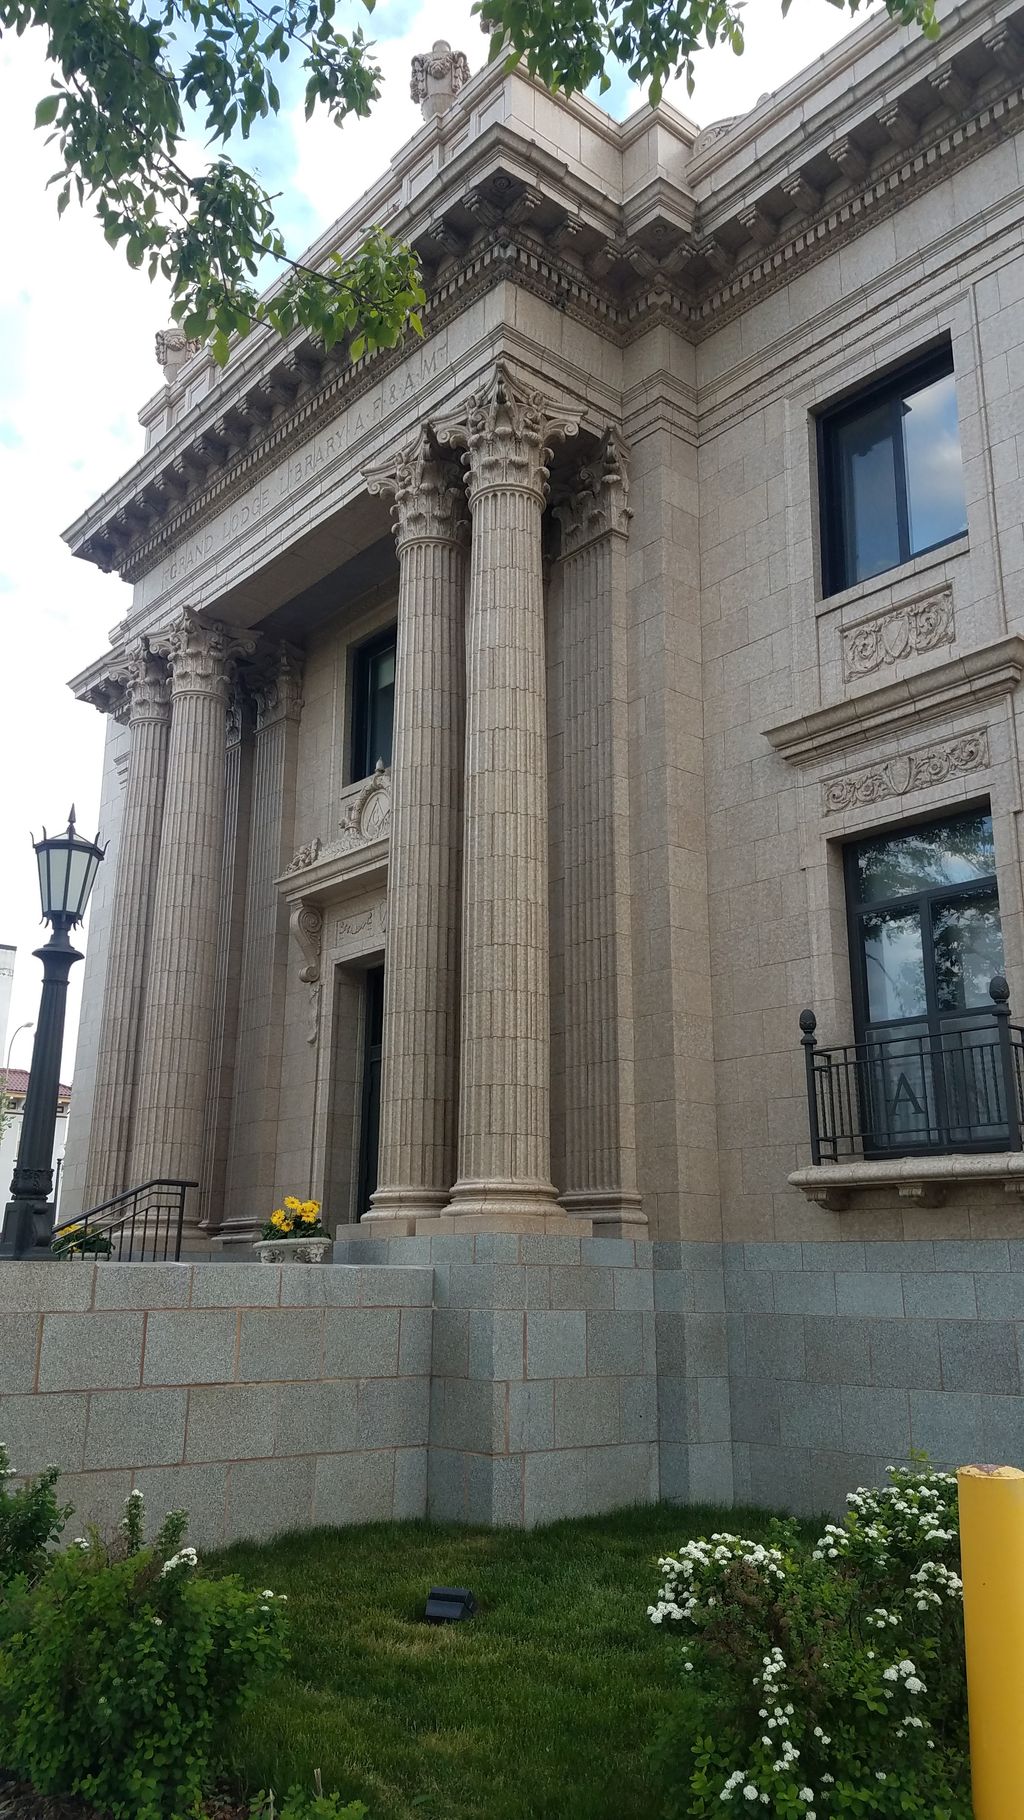 Grand Lodge and Library of the Ancient Free and Accepted Masons